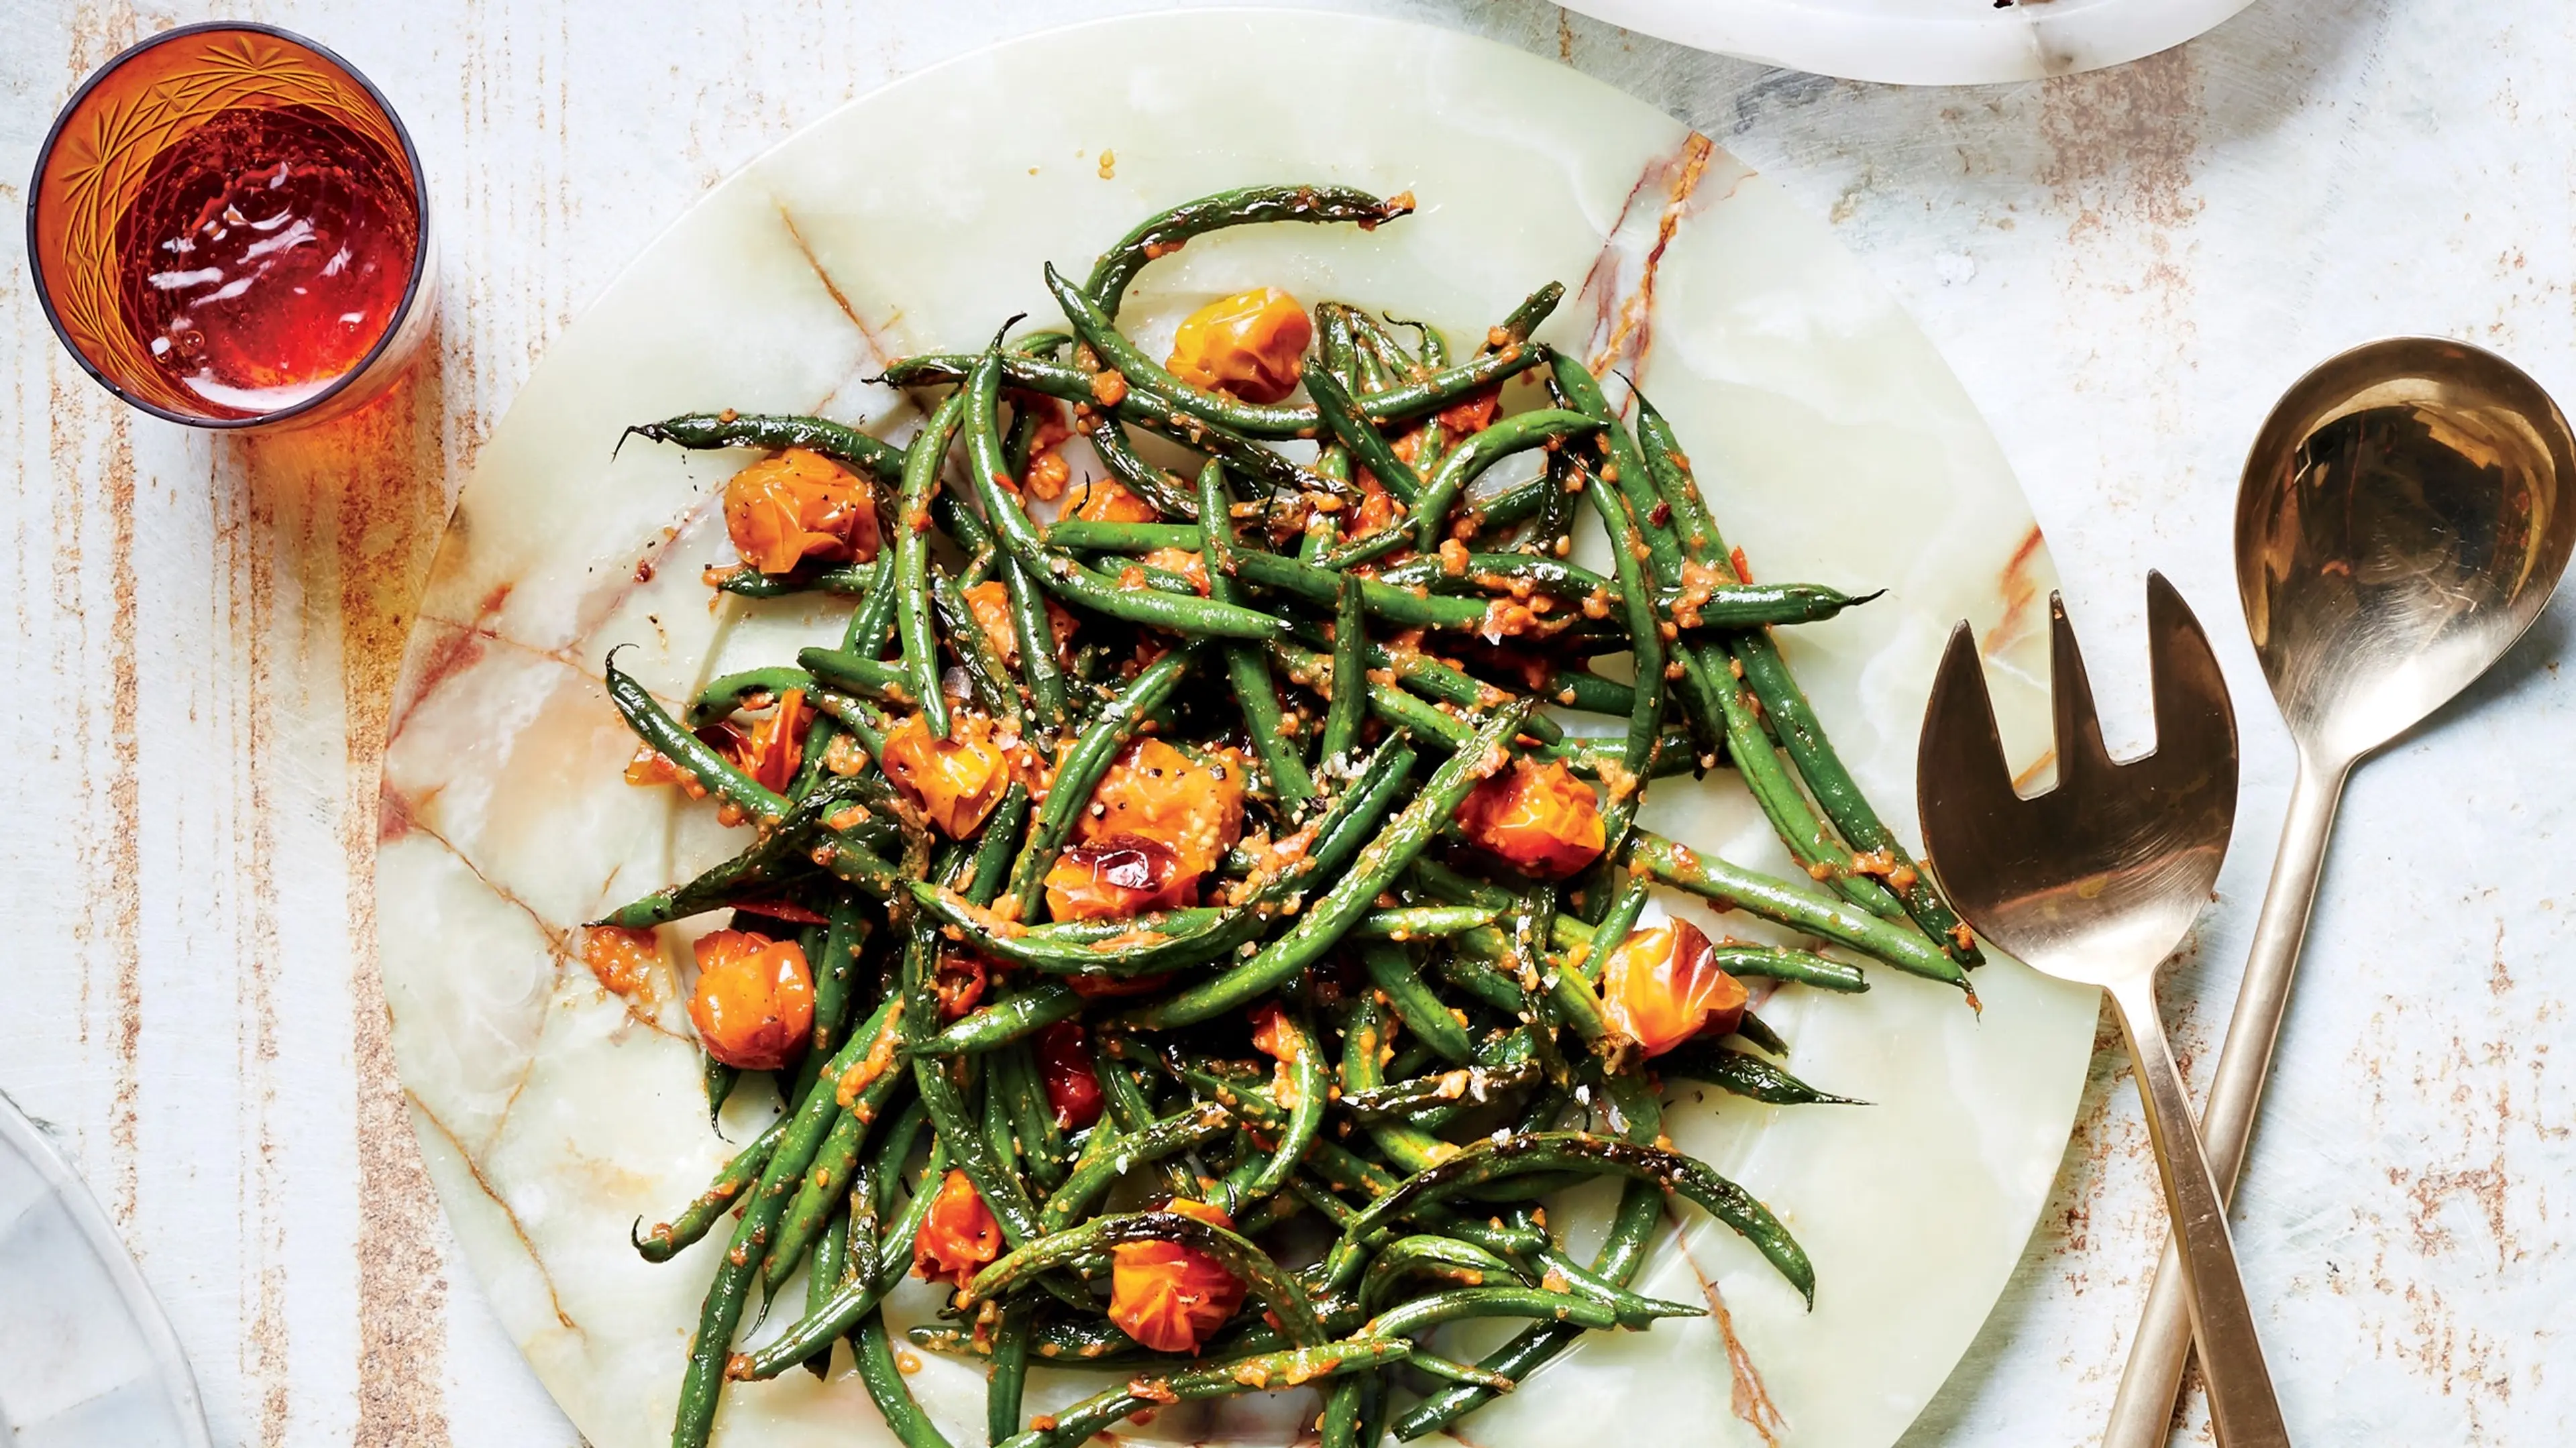 Blistered Green Beans With Tomato-Almond Pesto